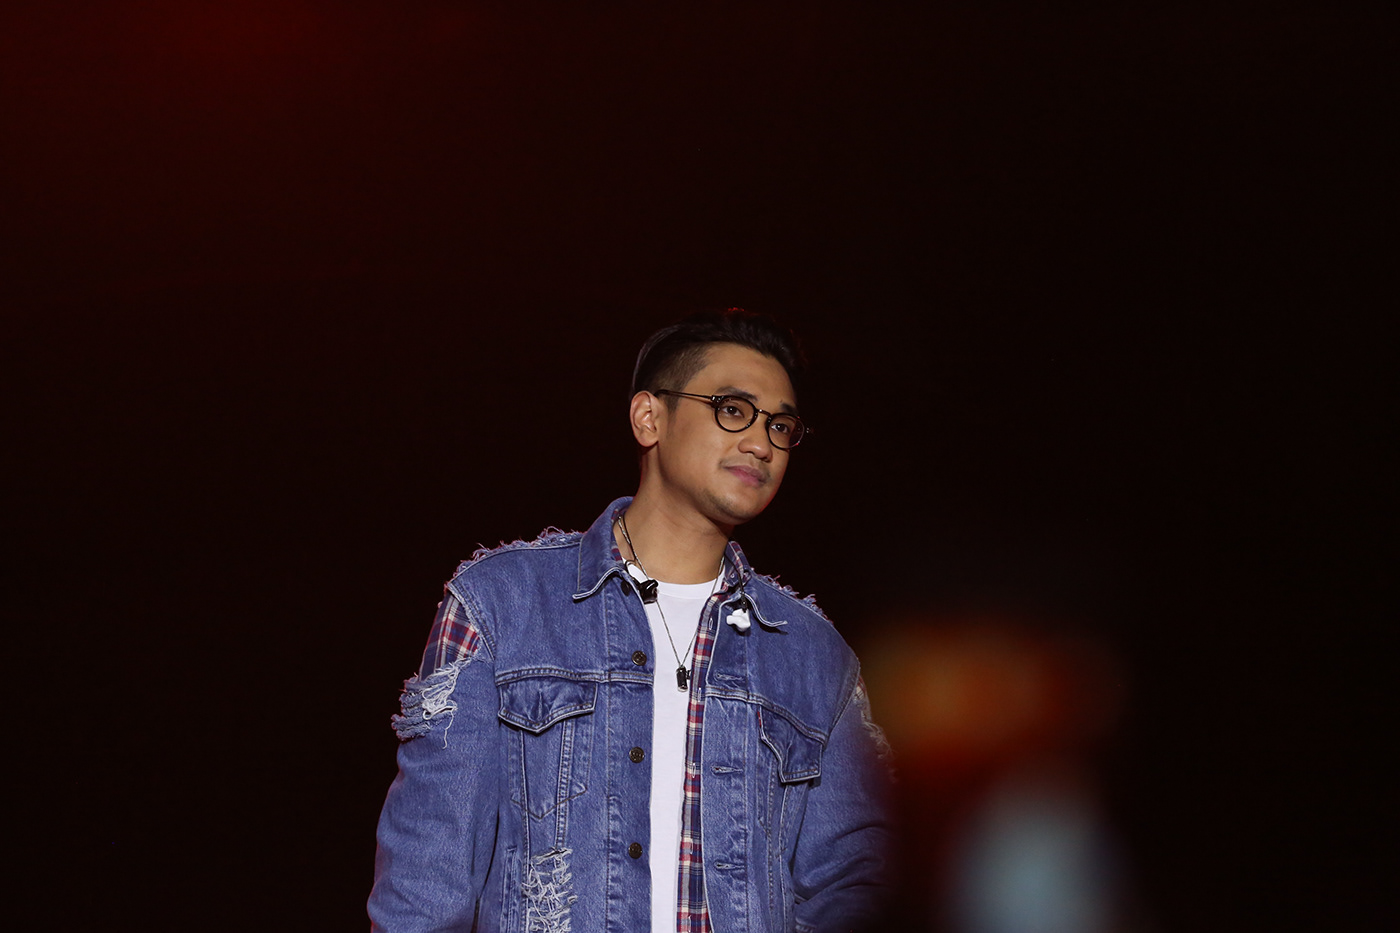 Afgan bandung canon 5D electricshooot indonesia musician music event music photography Singer Stage Photography